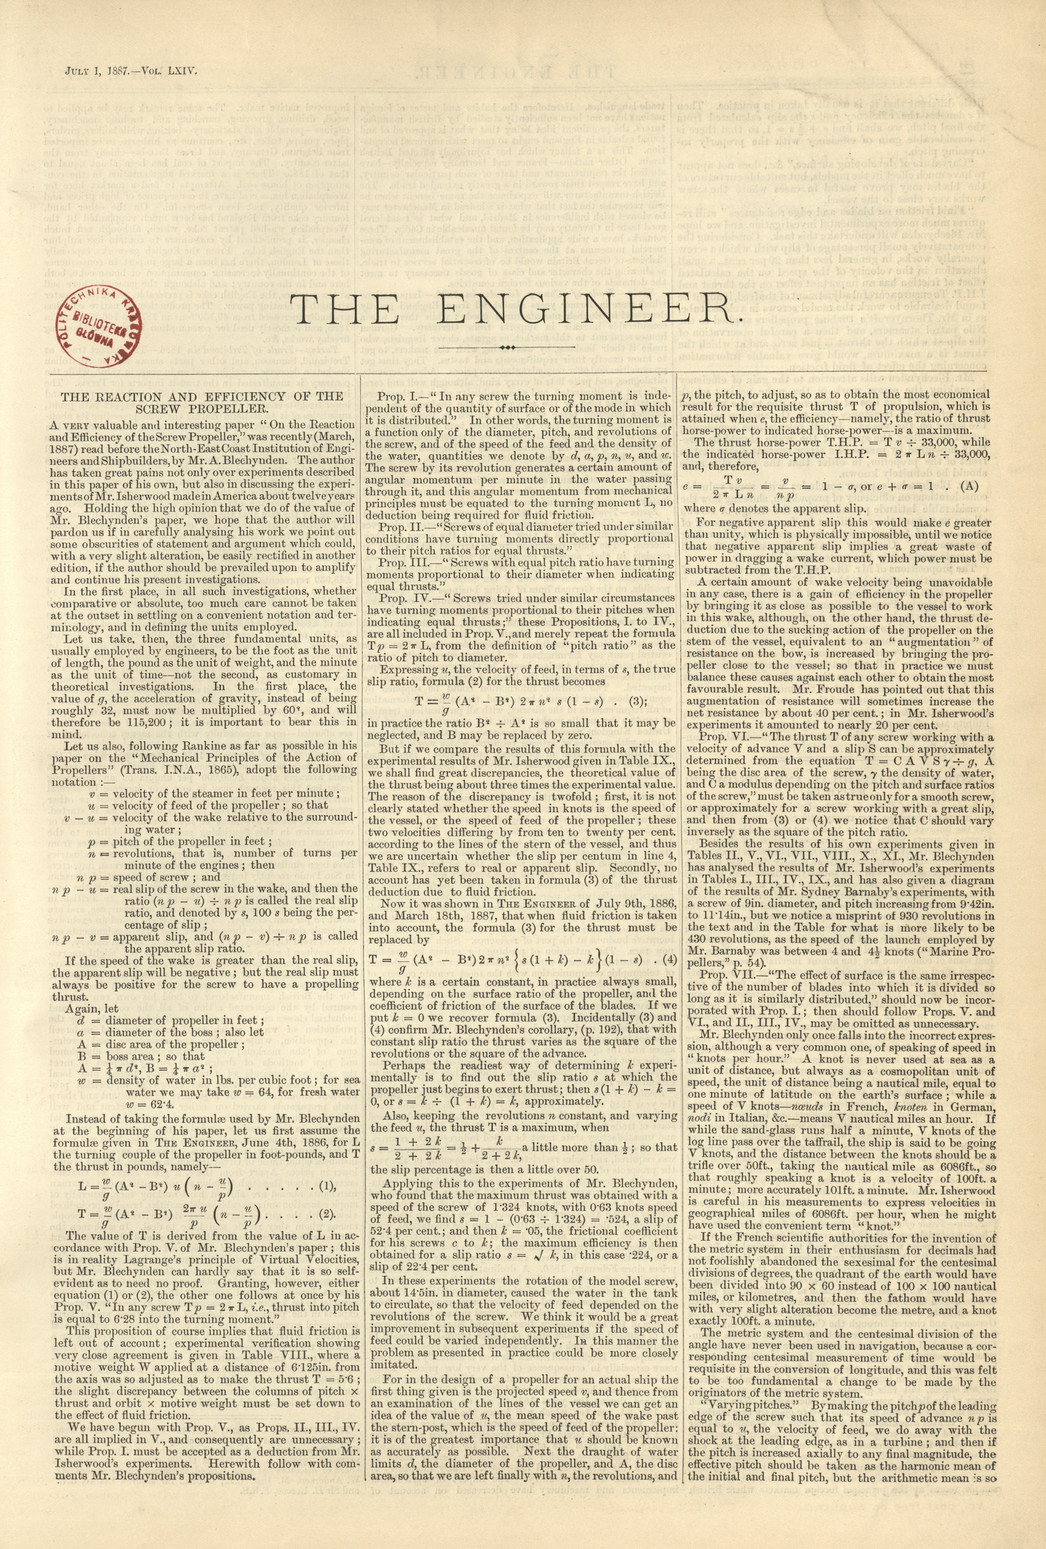 The Engineer, Vol.64, 1 July